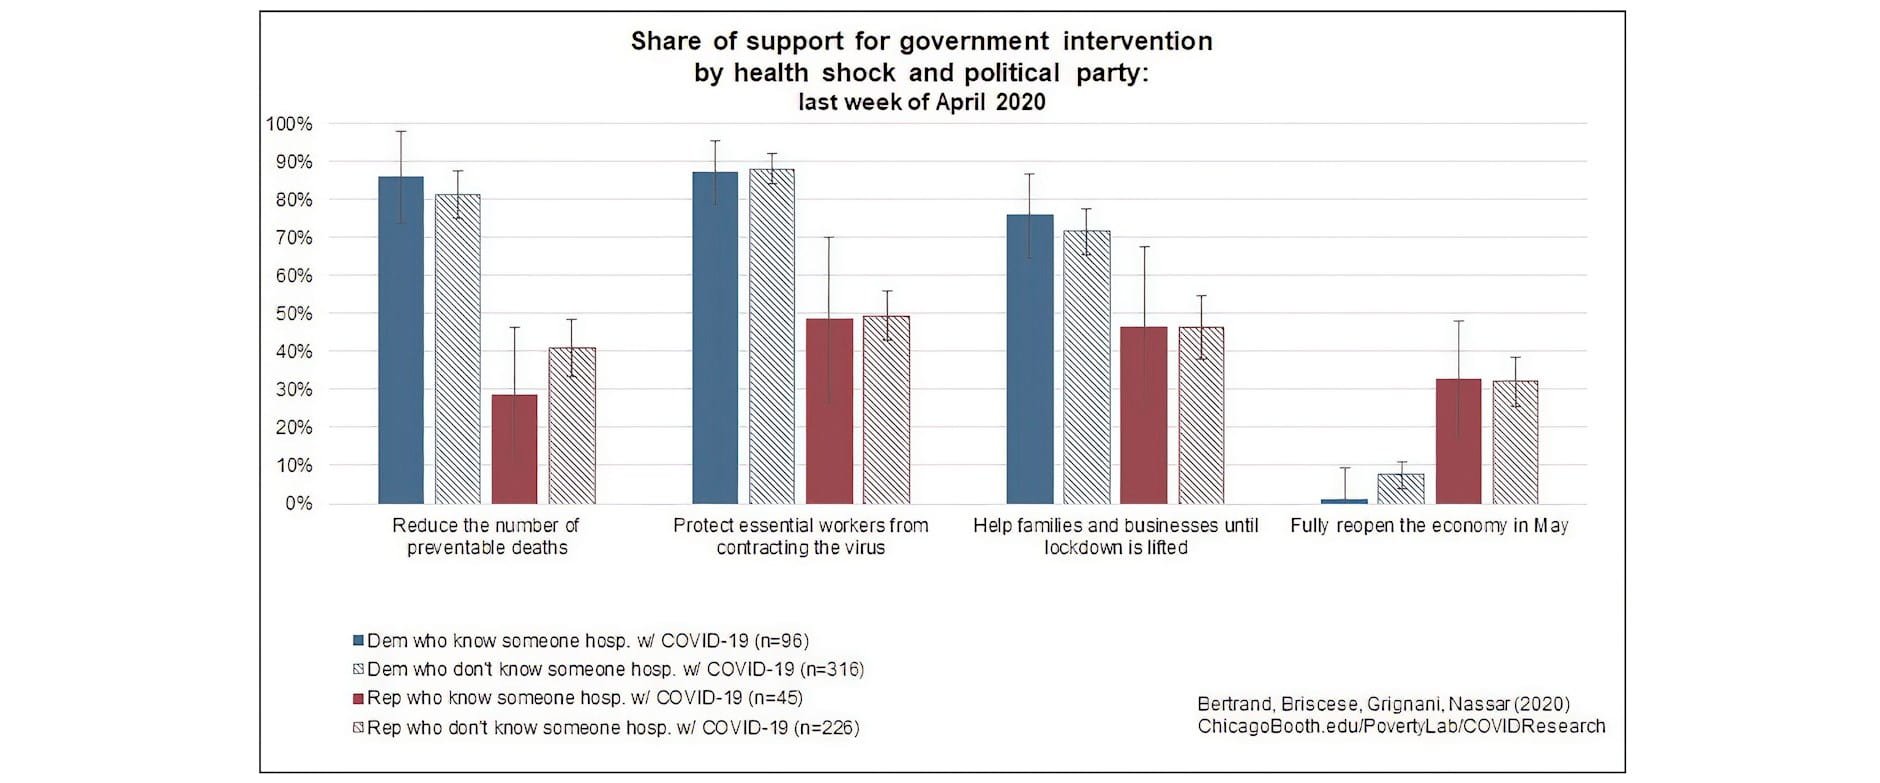 Bar graph showing support for government funding projects based on health shocks experienced